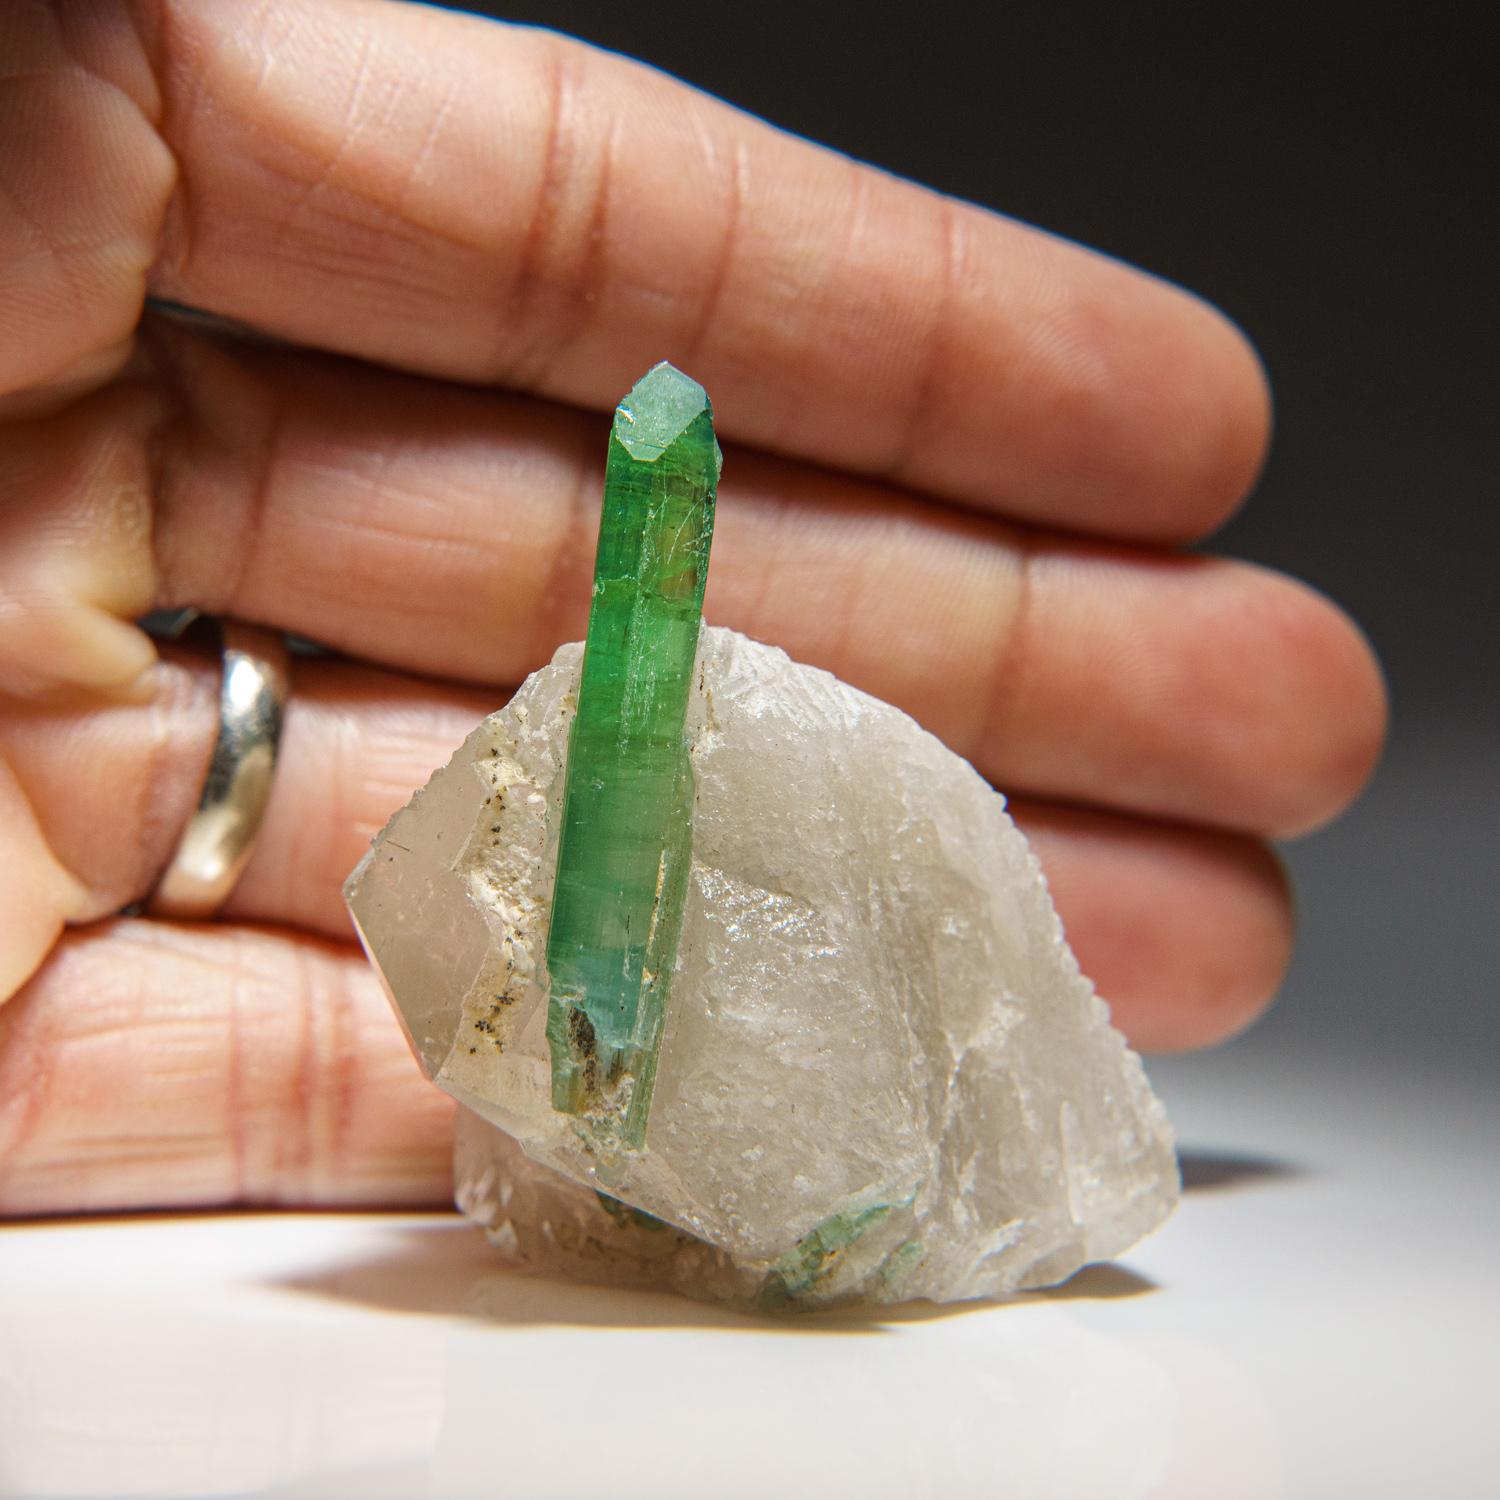 From Gilgit District, Gilgit-Baltistan, Pakistan Lustrous transparent green terminated elbaite tourmaline crystal in gray quartz with a few tabular milky quartz crystals. This unique specimen is highly prized for its rarity and beauty, and makes an